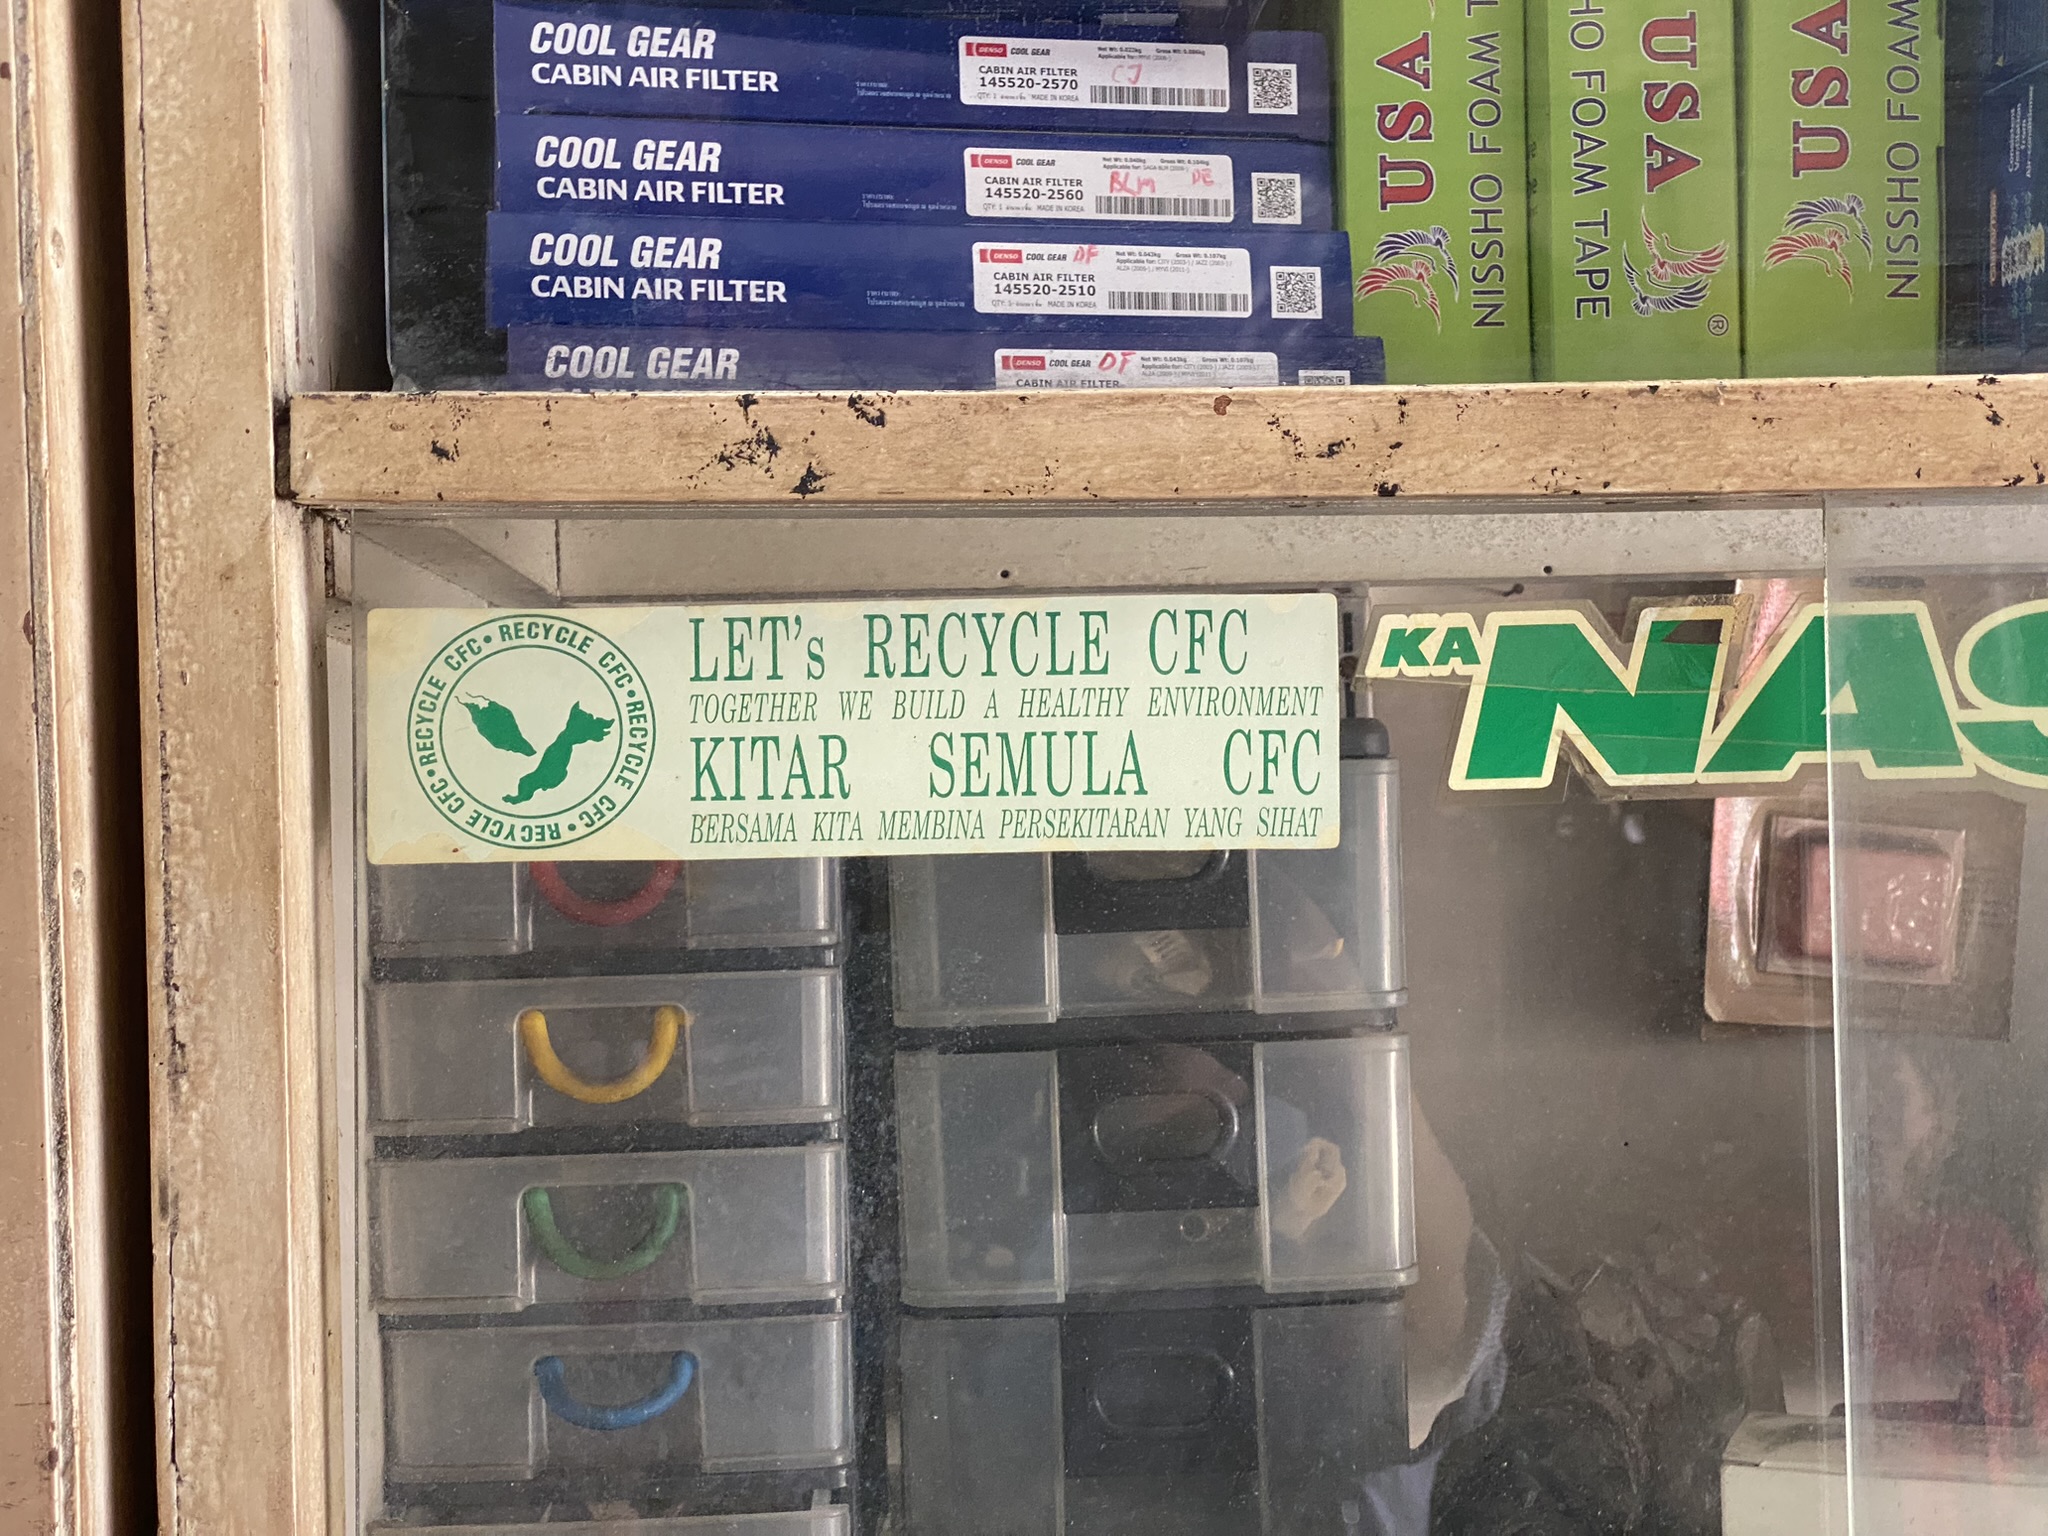 A sticker on a cabinet in a Malaysian air conditioner repair shop. In the 1990s, the government funded training for technicians on the environmental impacts of CFC-12 emissions from motor vehicles. But similar trainings haven't been continued for gases such as HFC-134a. Photo: Tilden Chao, 2023.